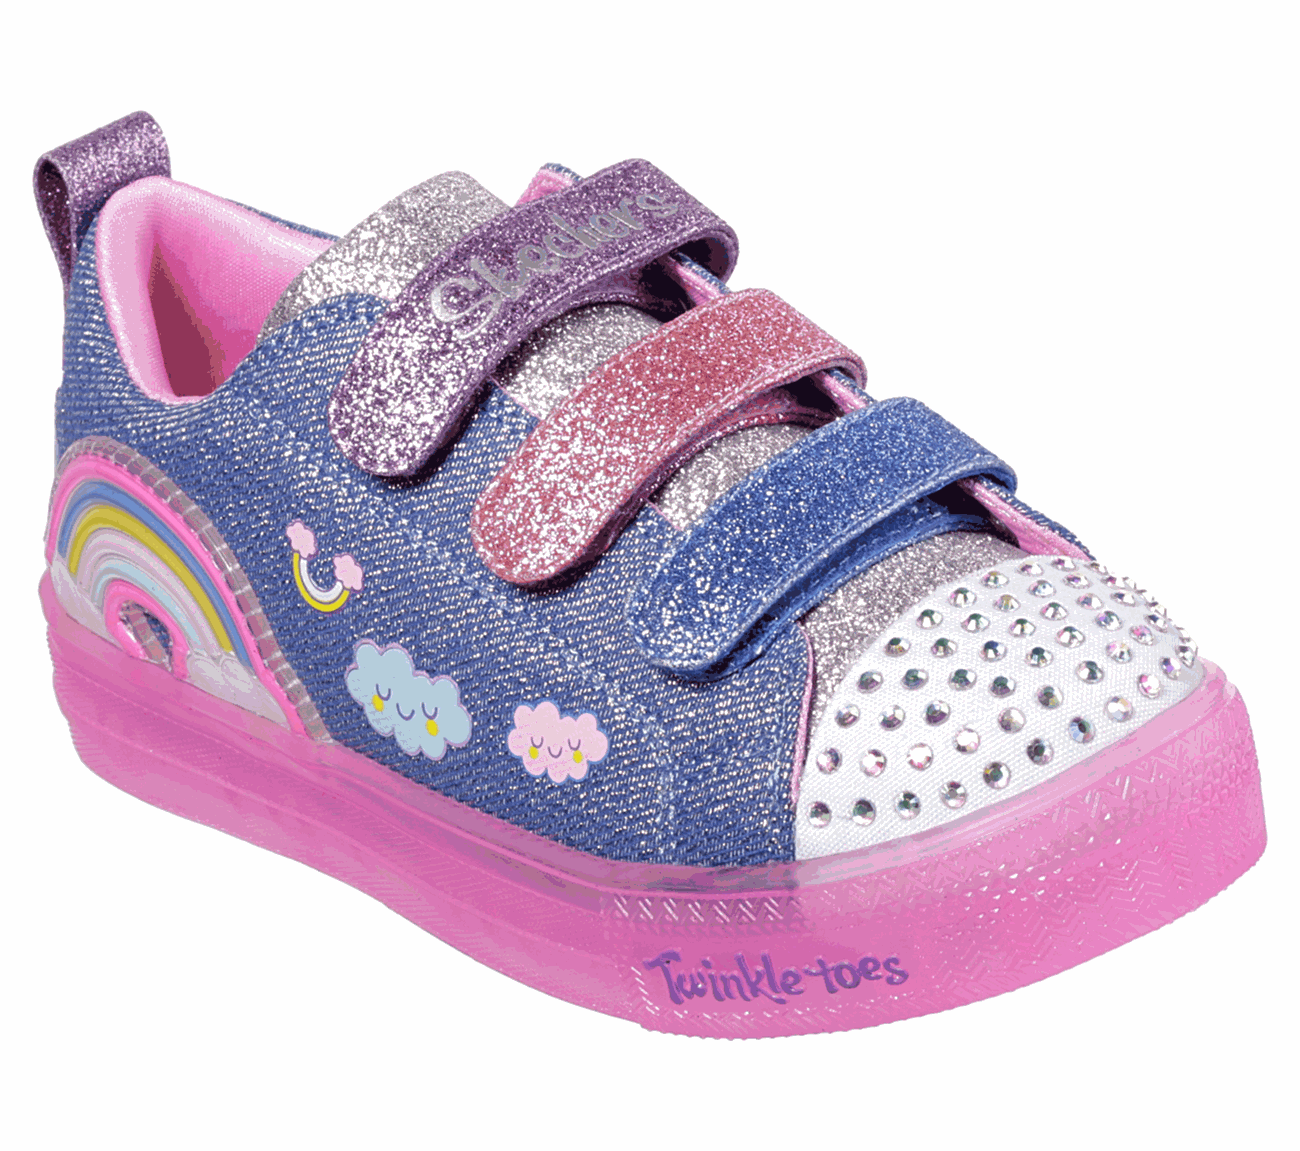 Rainbow Glow Twinkle Toes Shoes